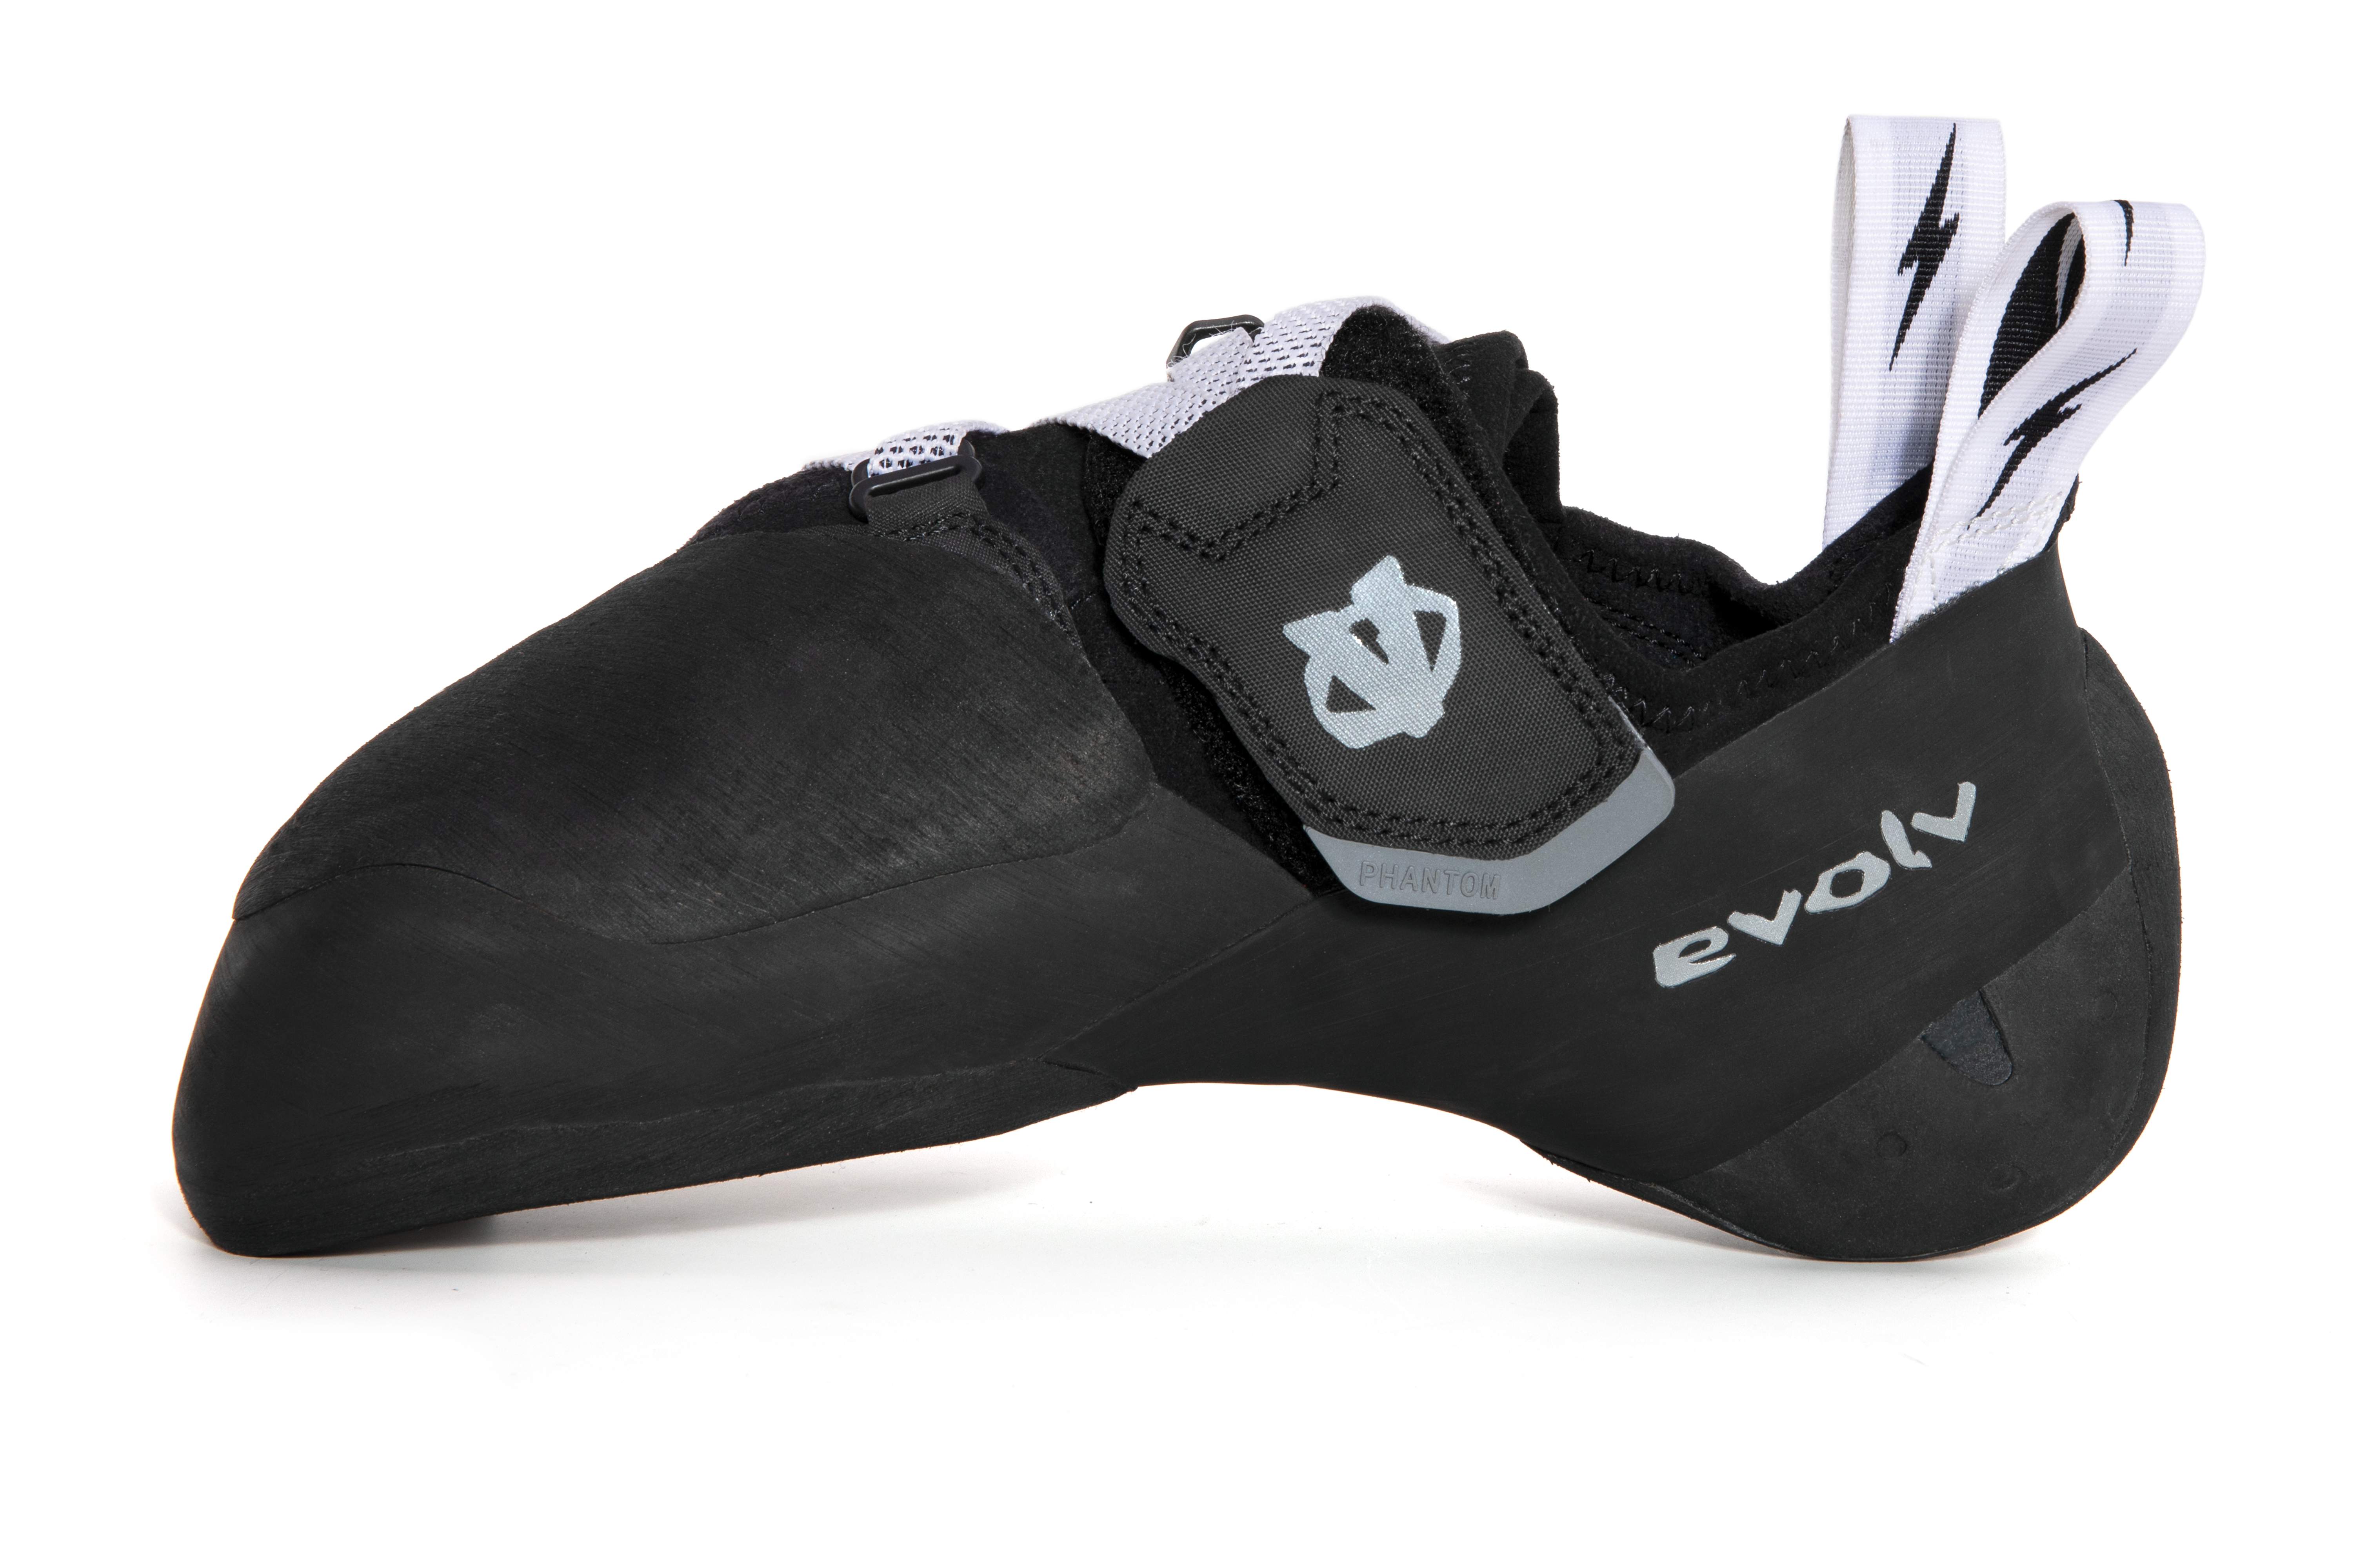 Evolv’s New Phantom Shoe Now Available In Stores, Gyms And Online | SGB ...